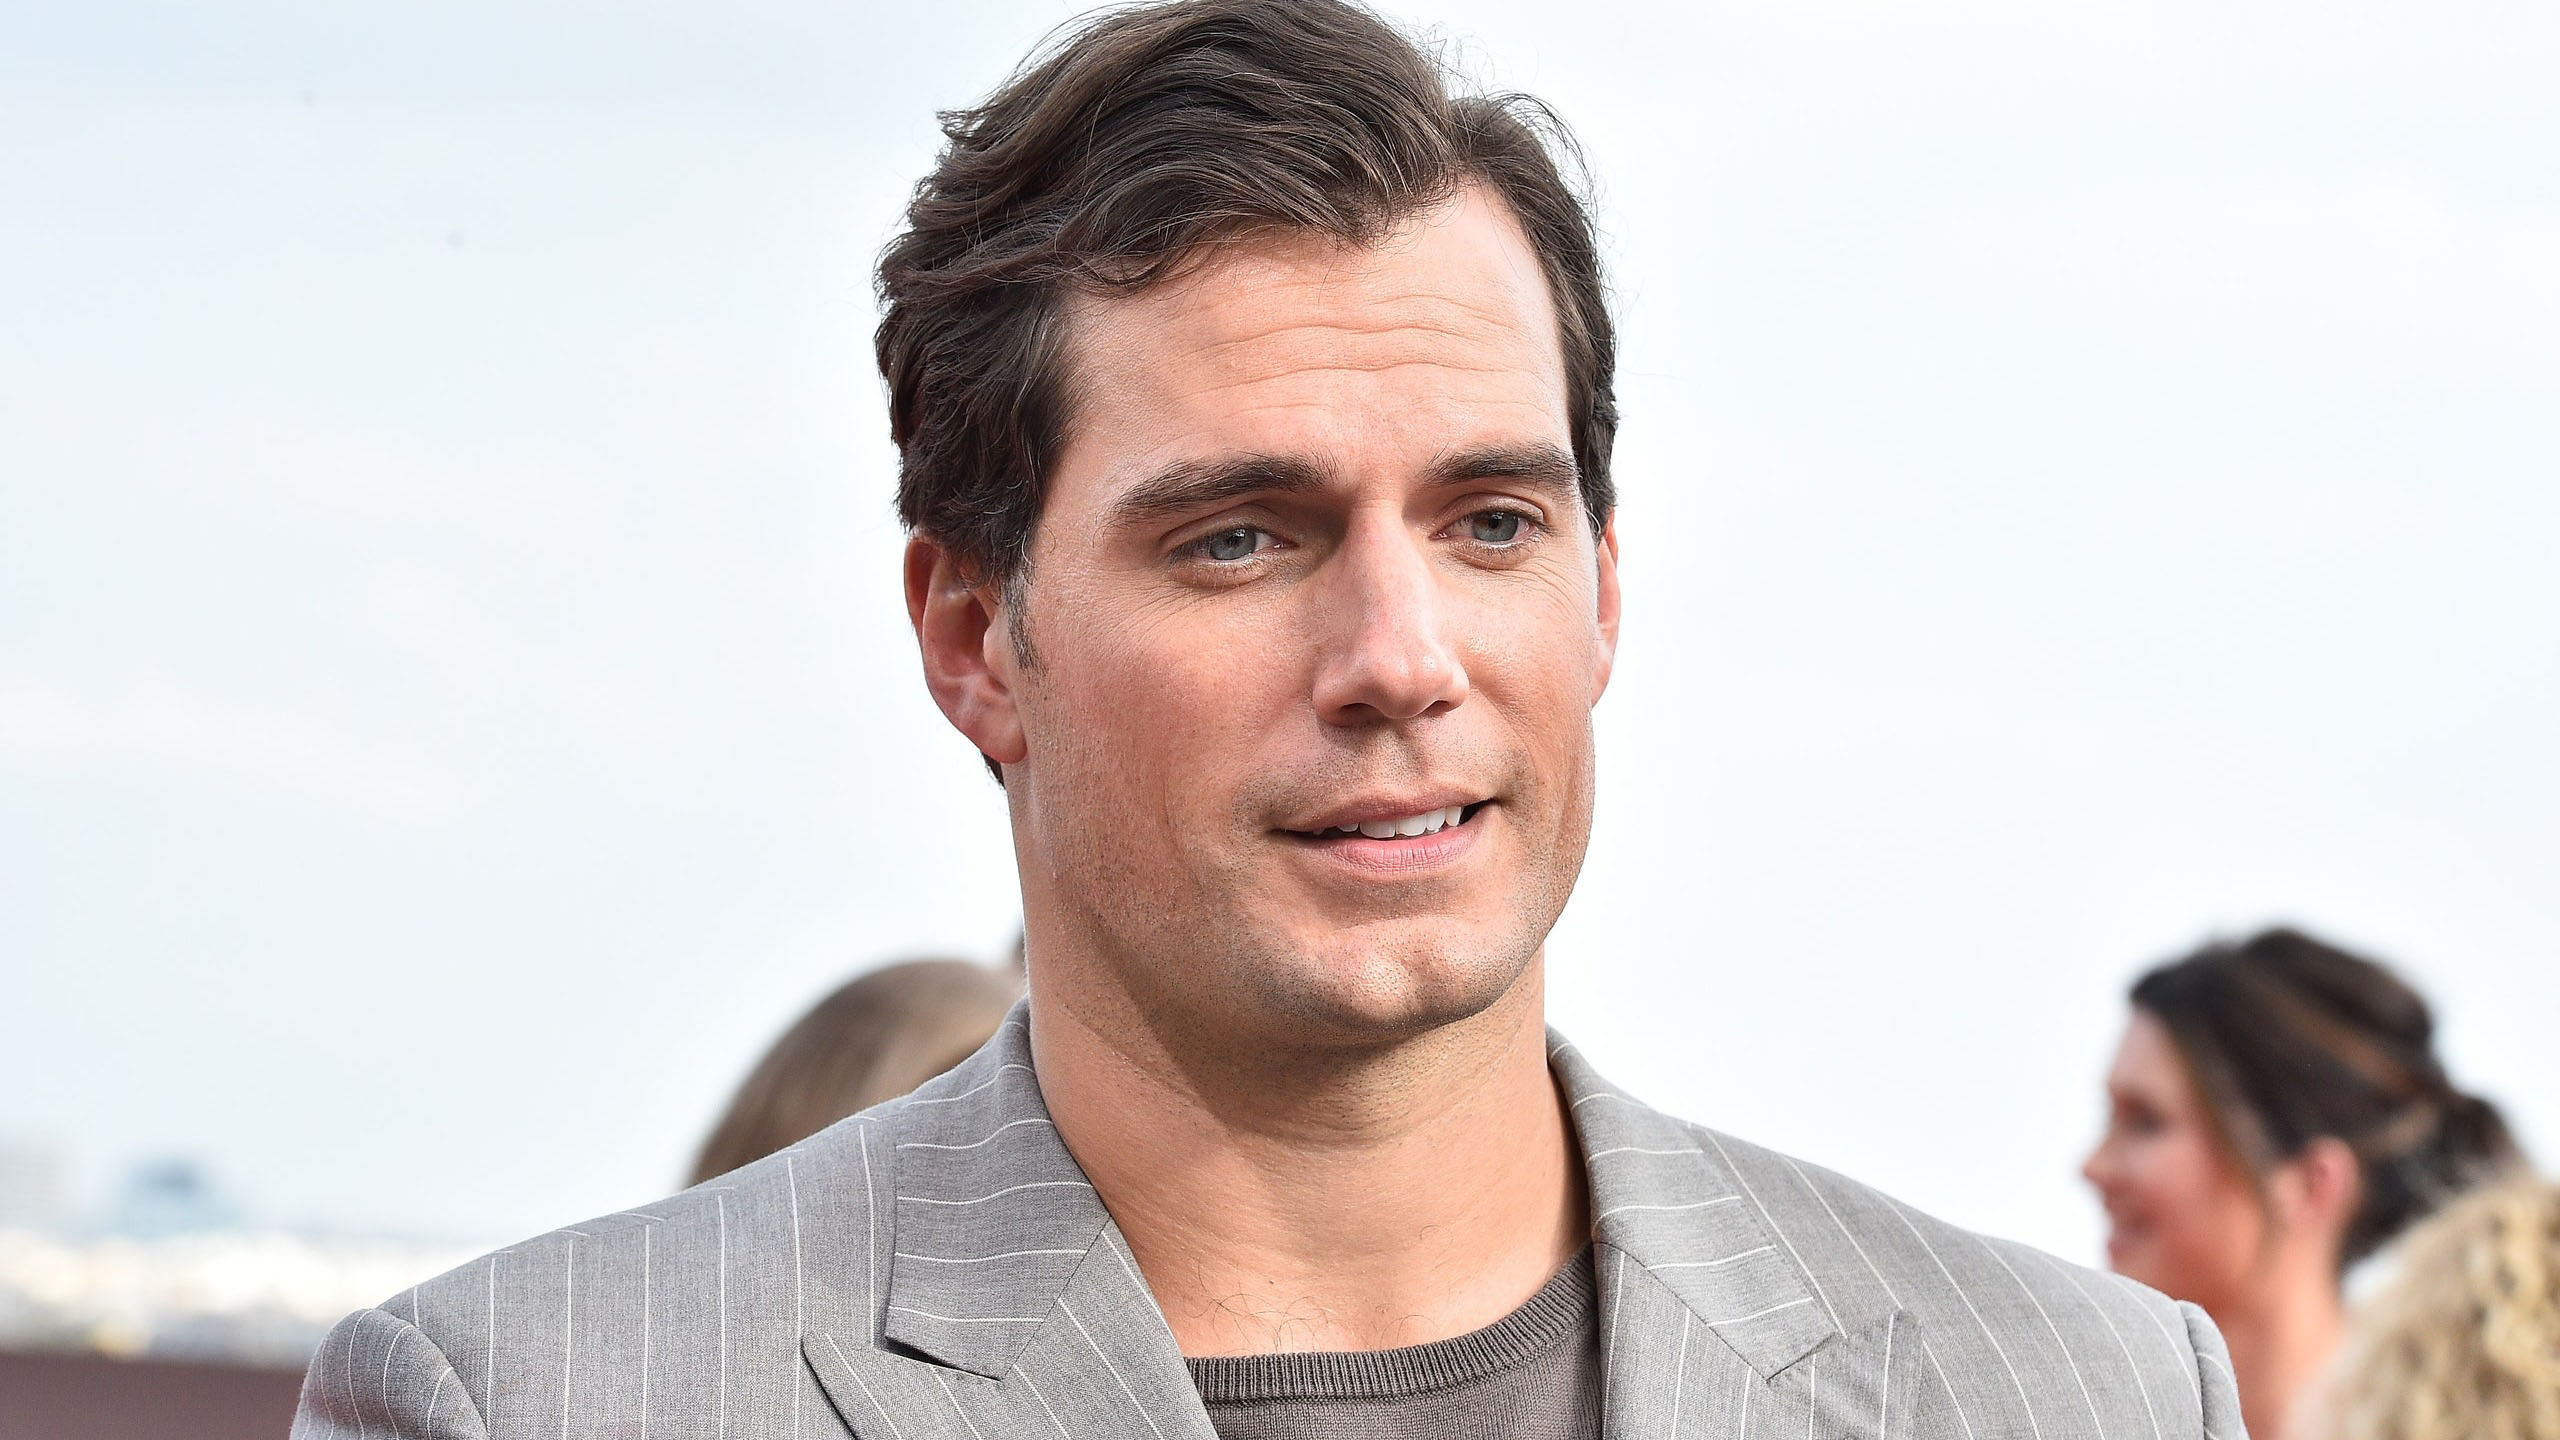 Henry William Dalgliesh Cavill (/?kæv?l/; born 5 May 1983) is an English actor. He is known for his portrayal of Charles Brandon ...